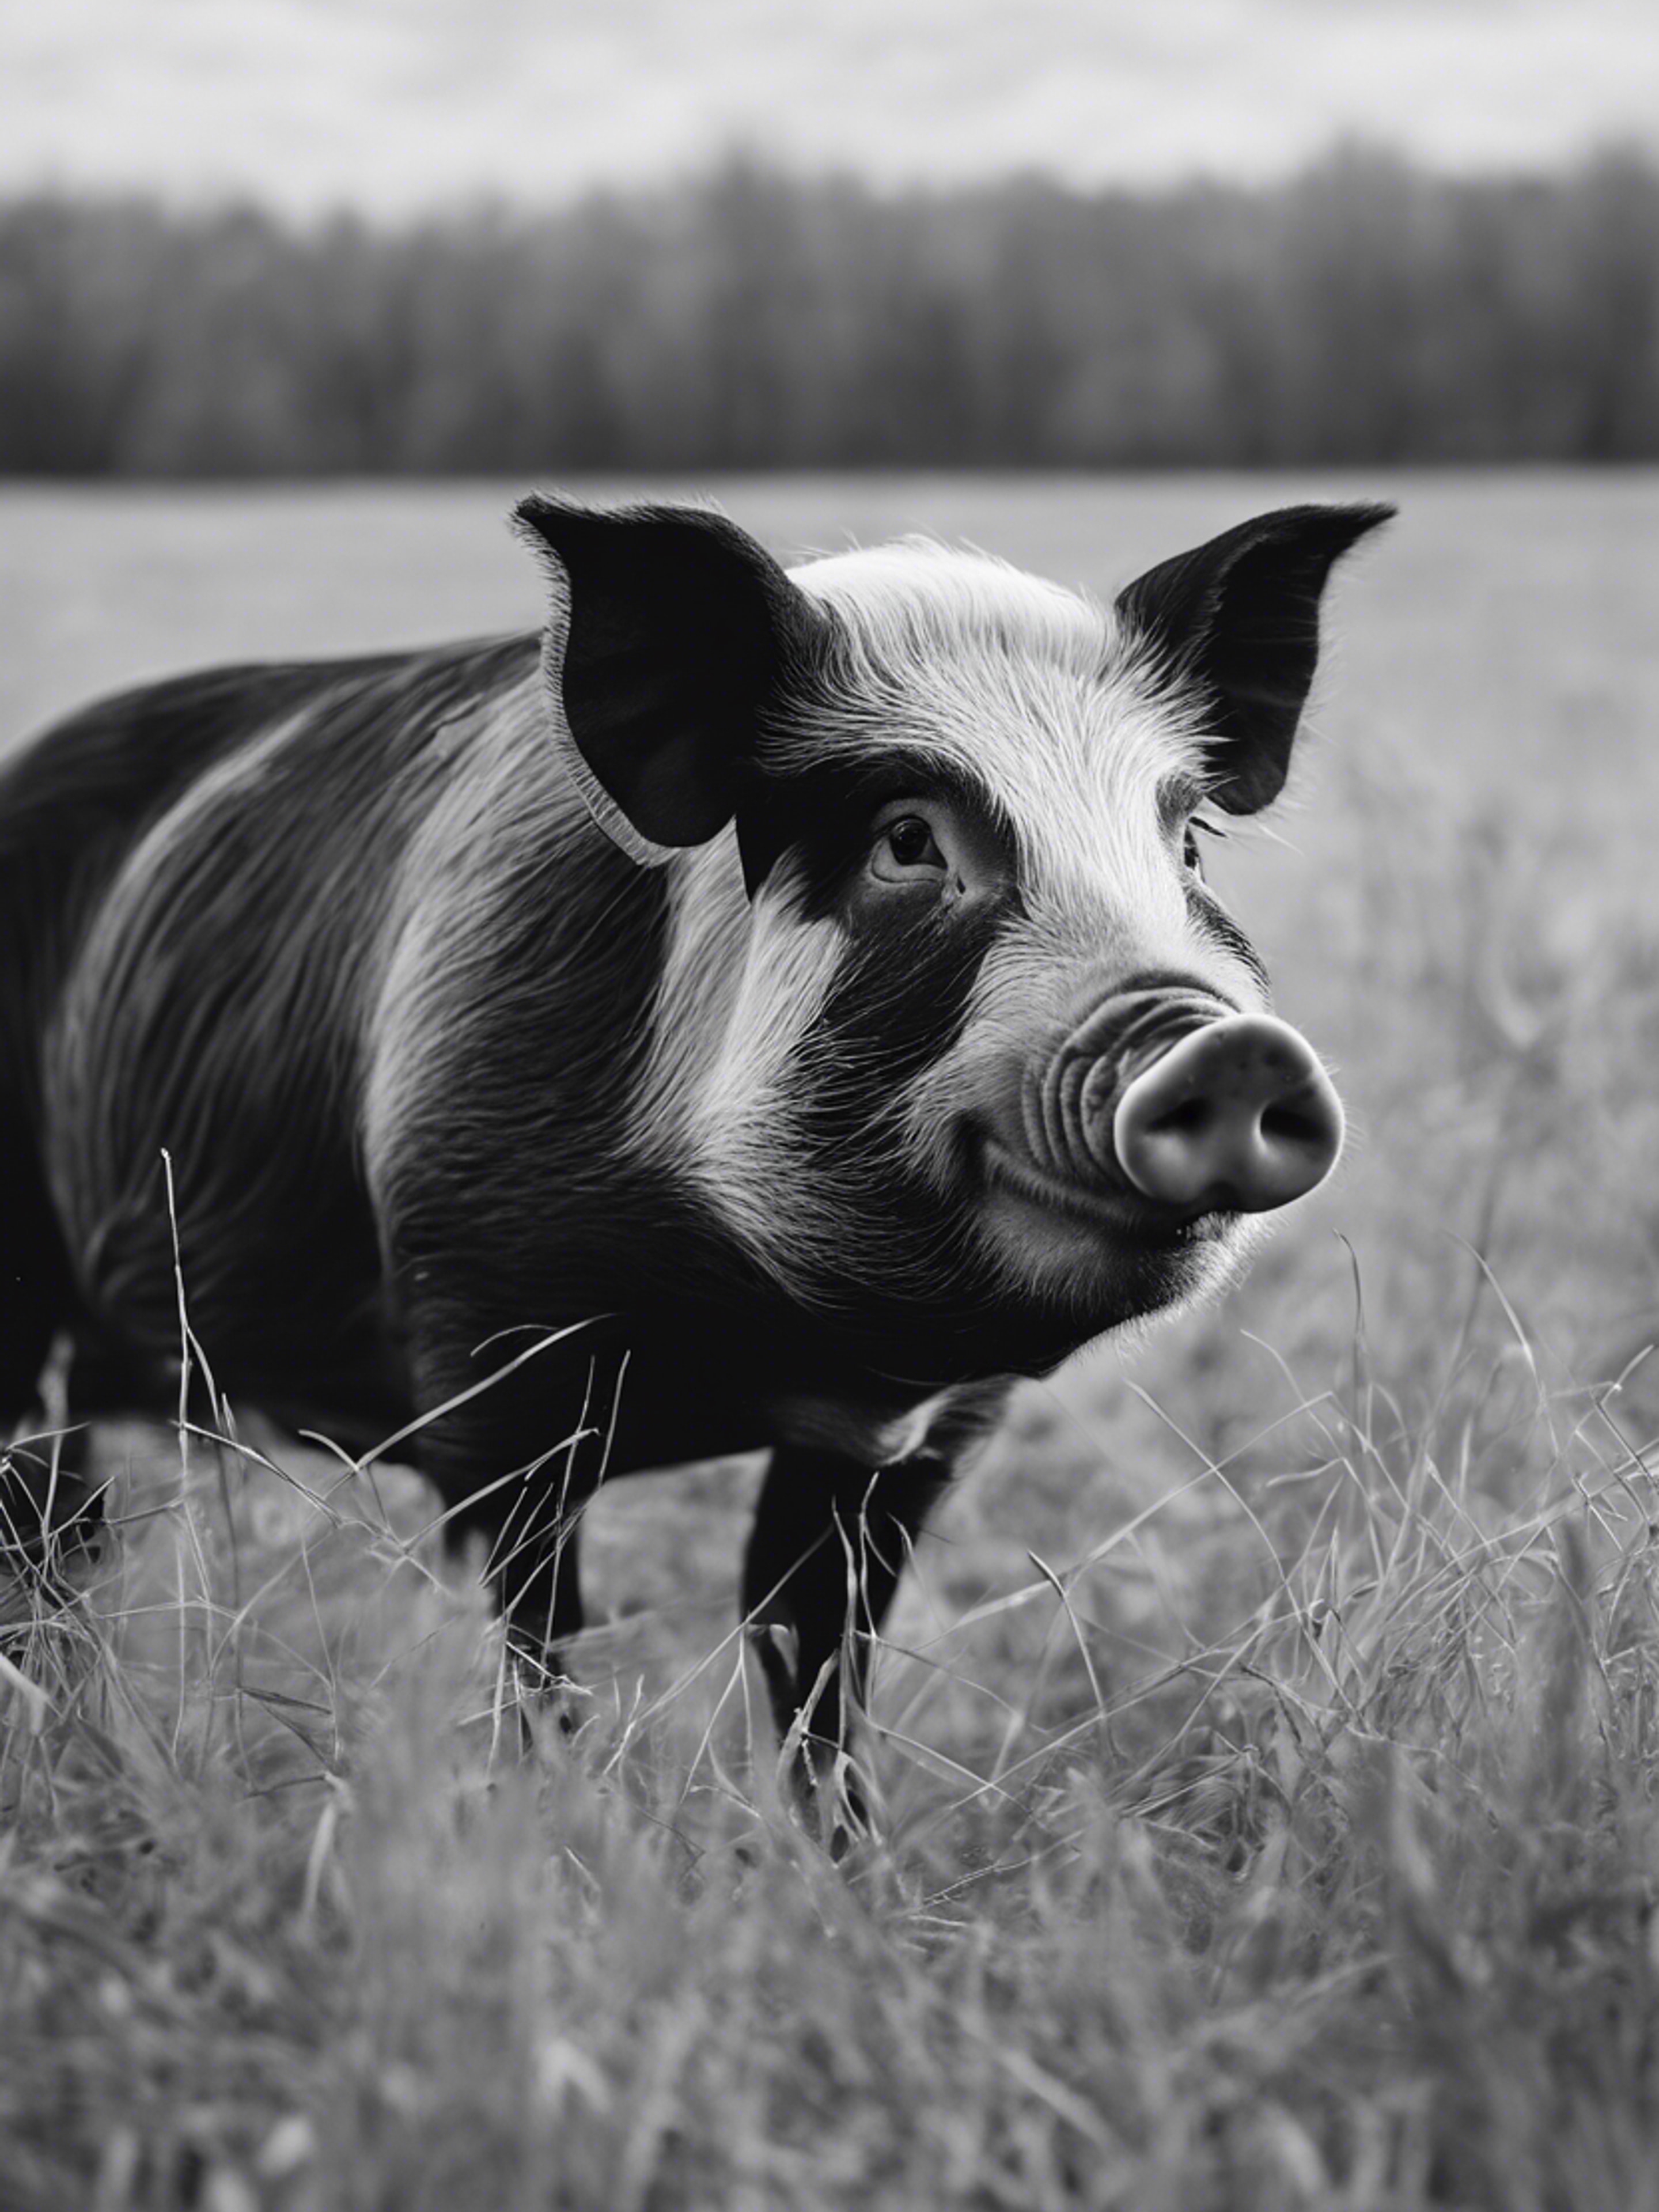 A black and white pig with clean fur, captured in a country meadow during tranquility of winter. Обои[700eb497dc0e43a8b530]